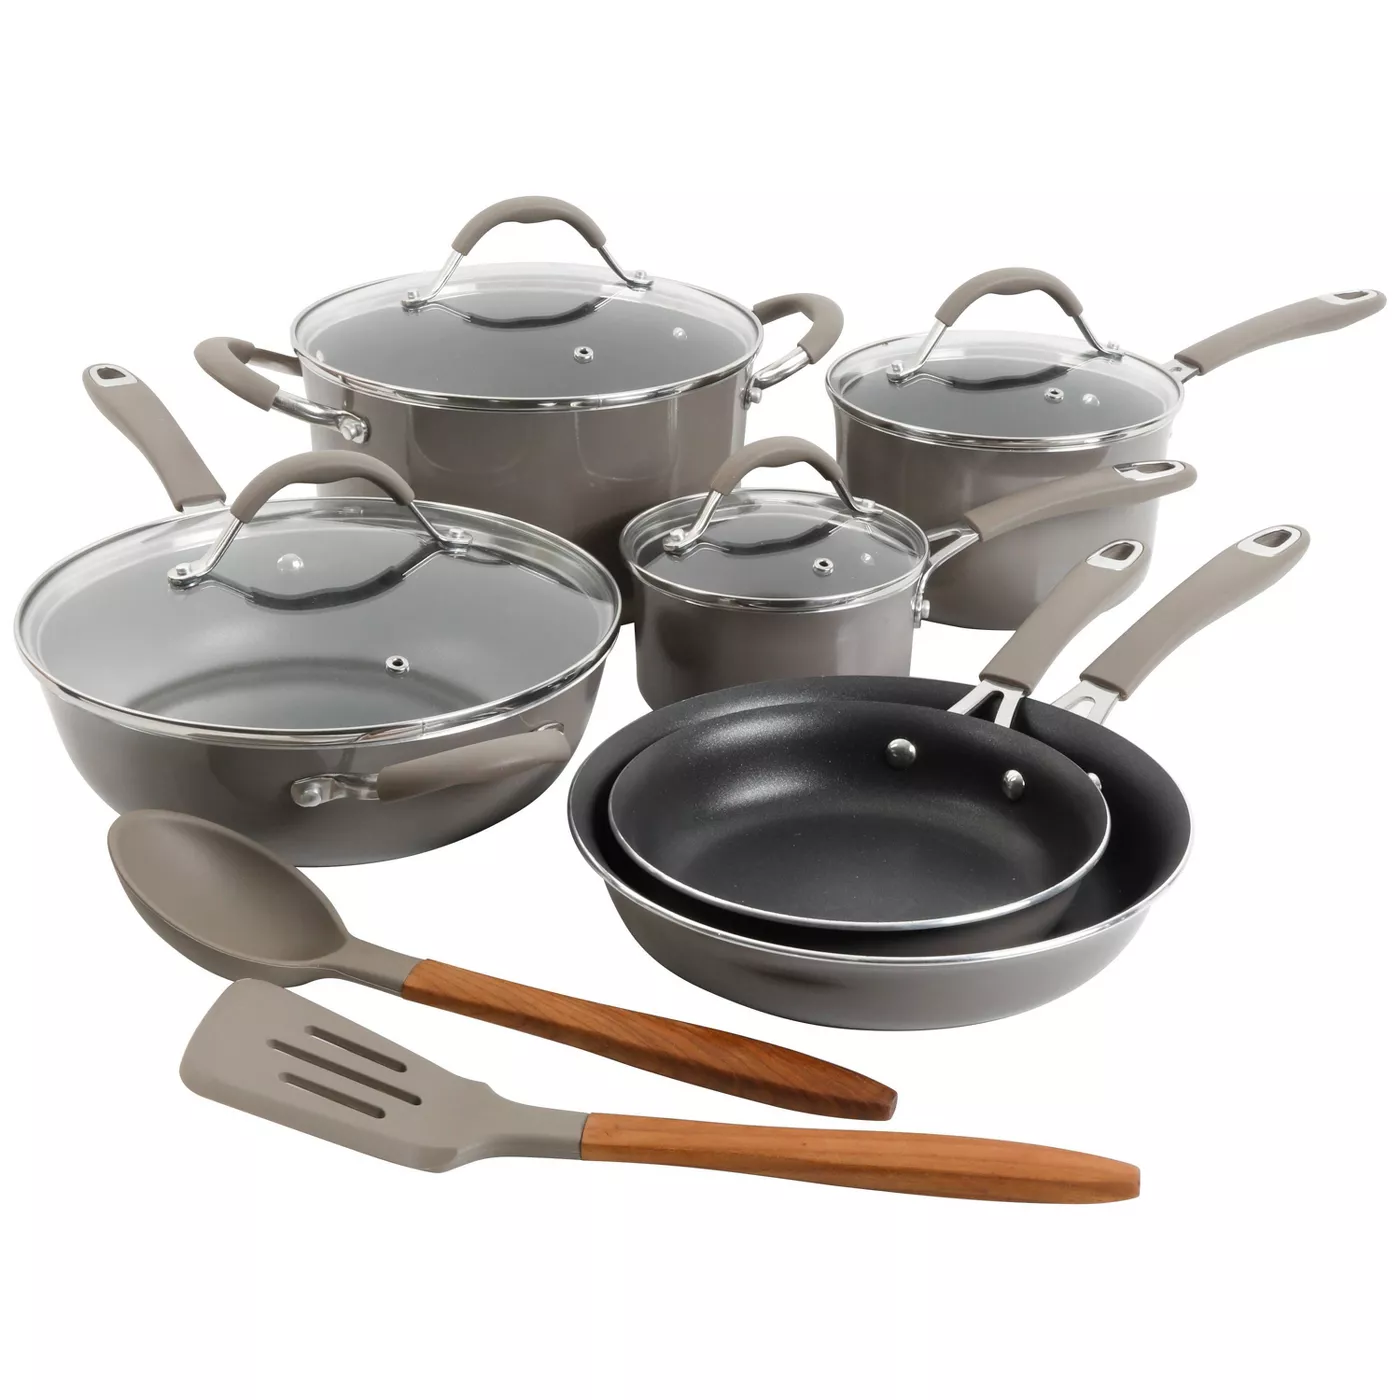 Image of nonstick pots and pans